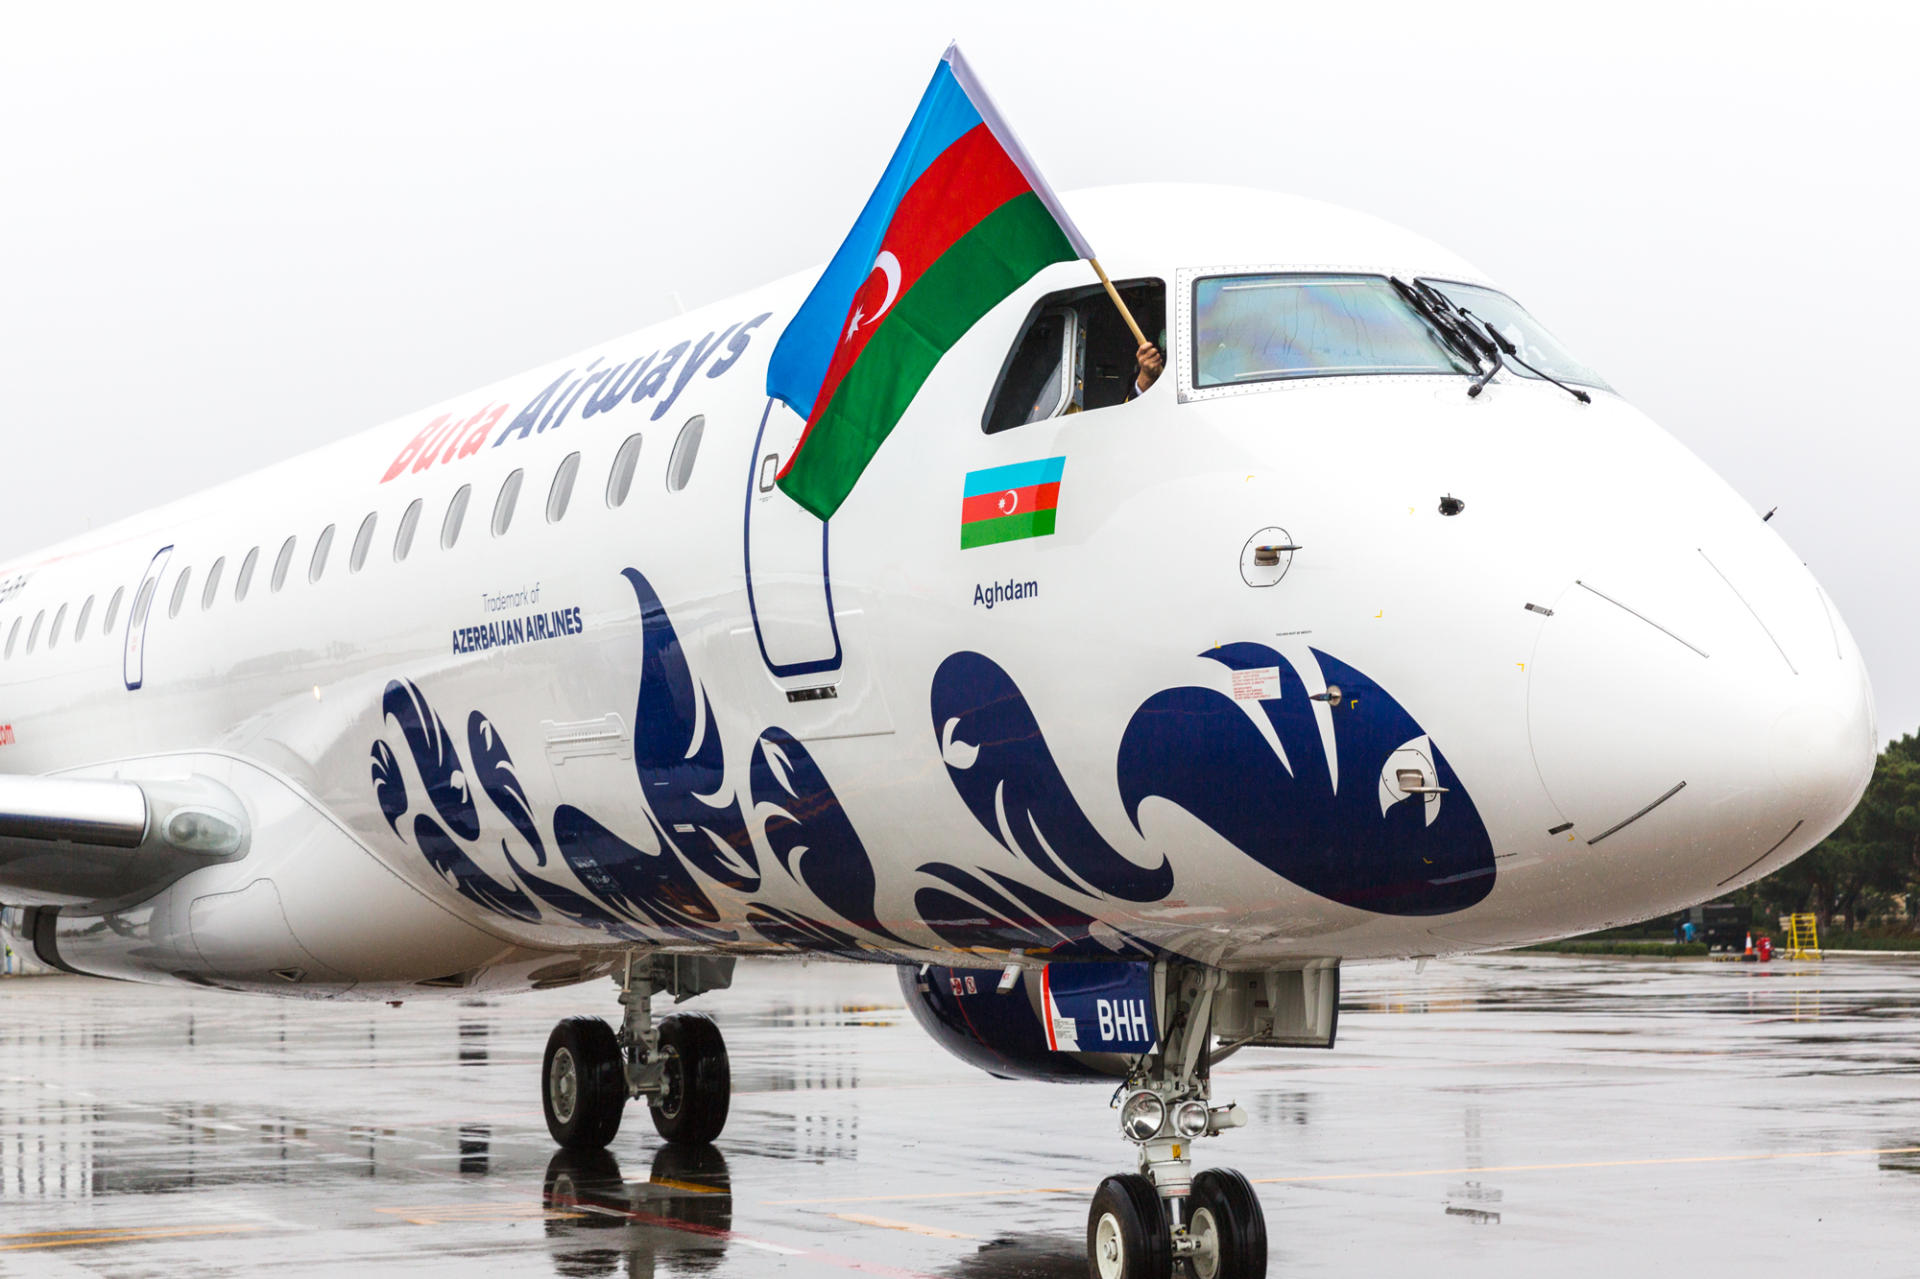 Buta Airways replenishes its fleet with another Embraer E-190 (PHOTO)